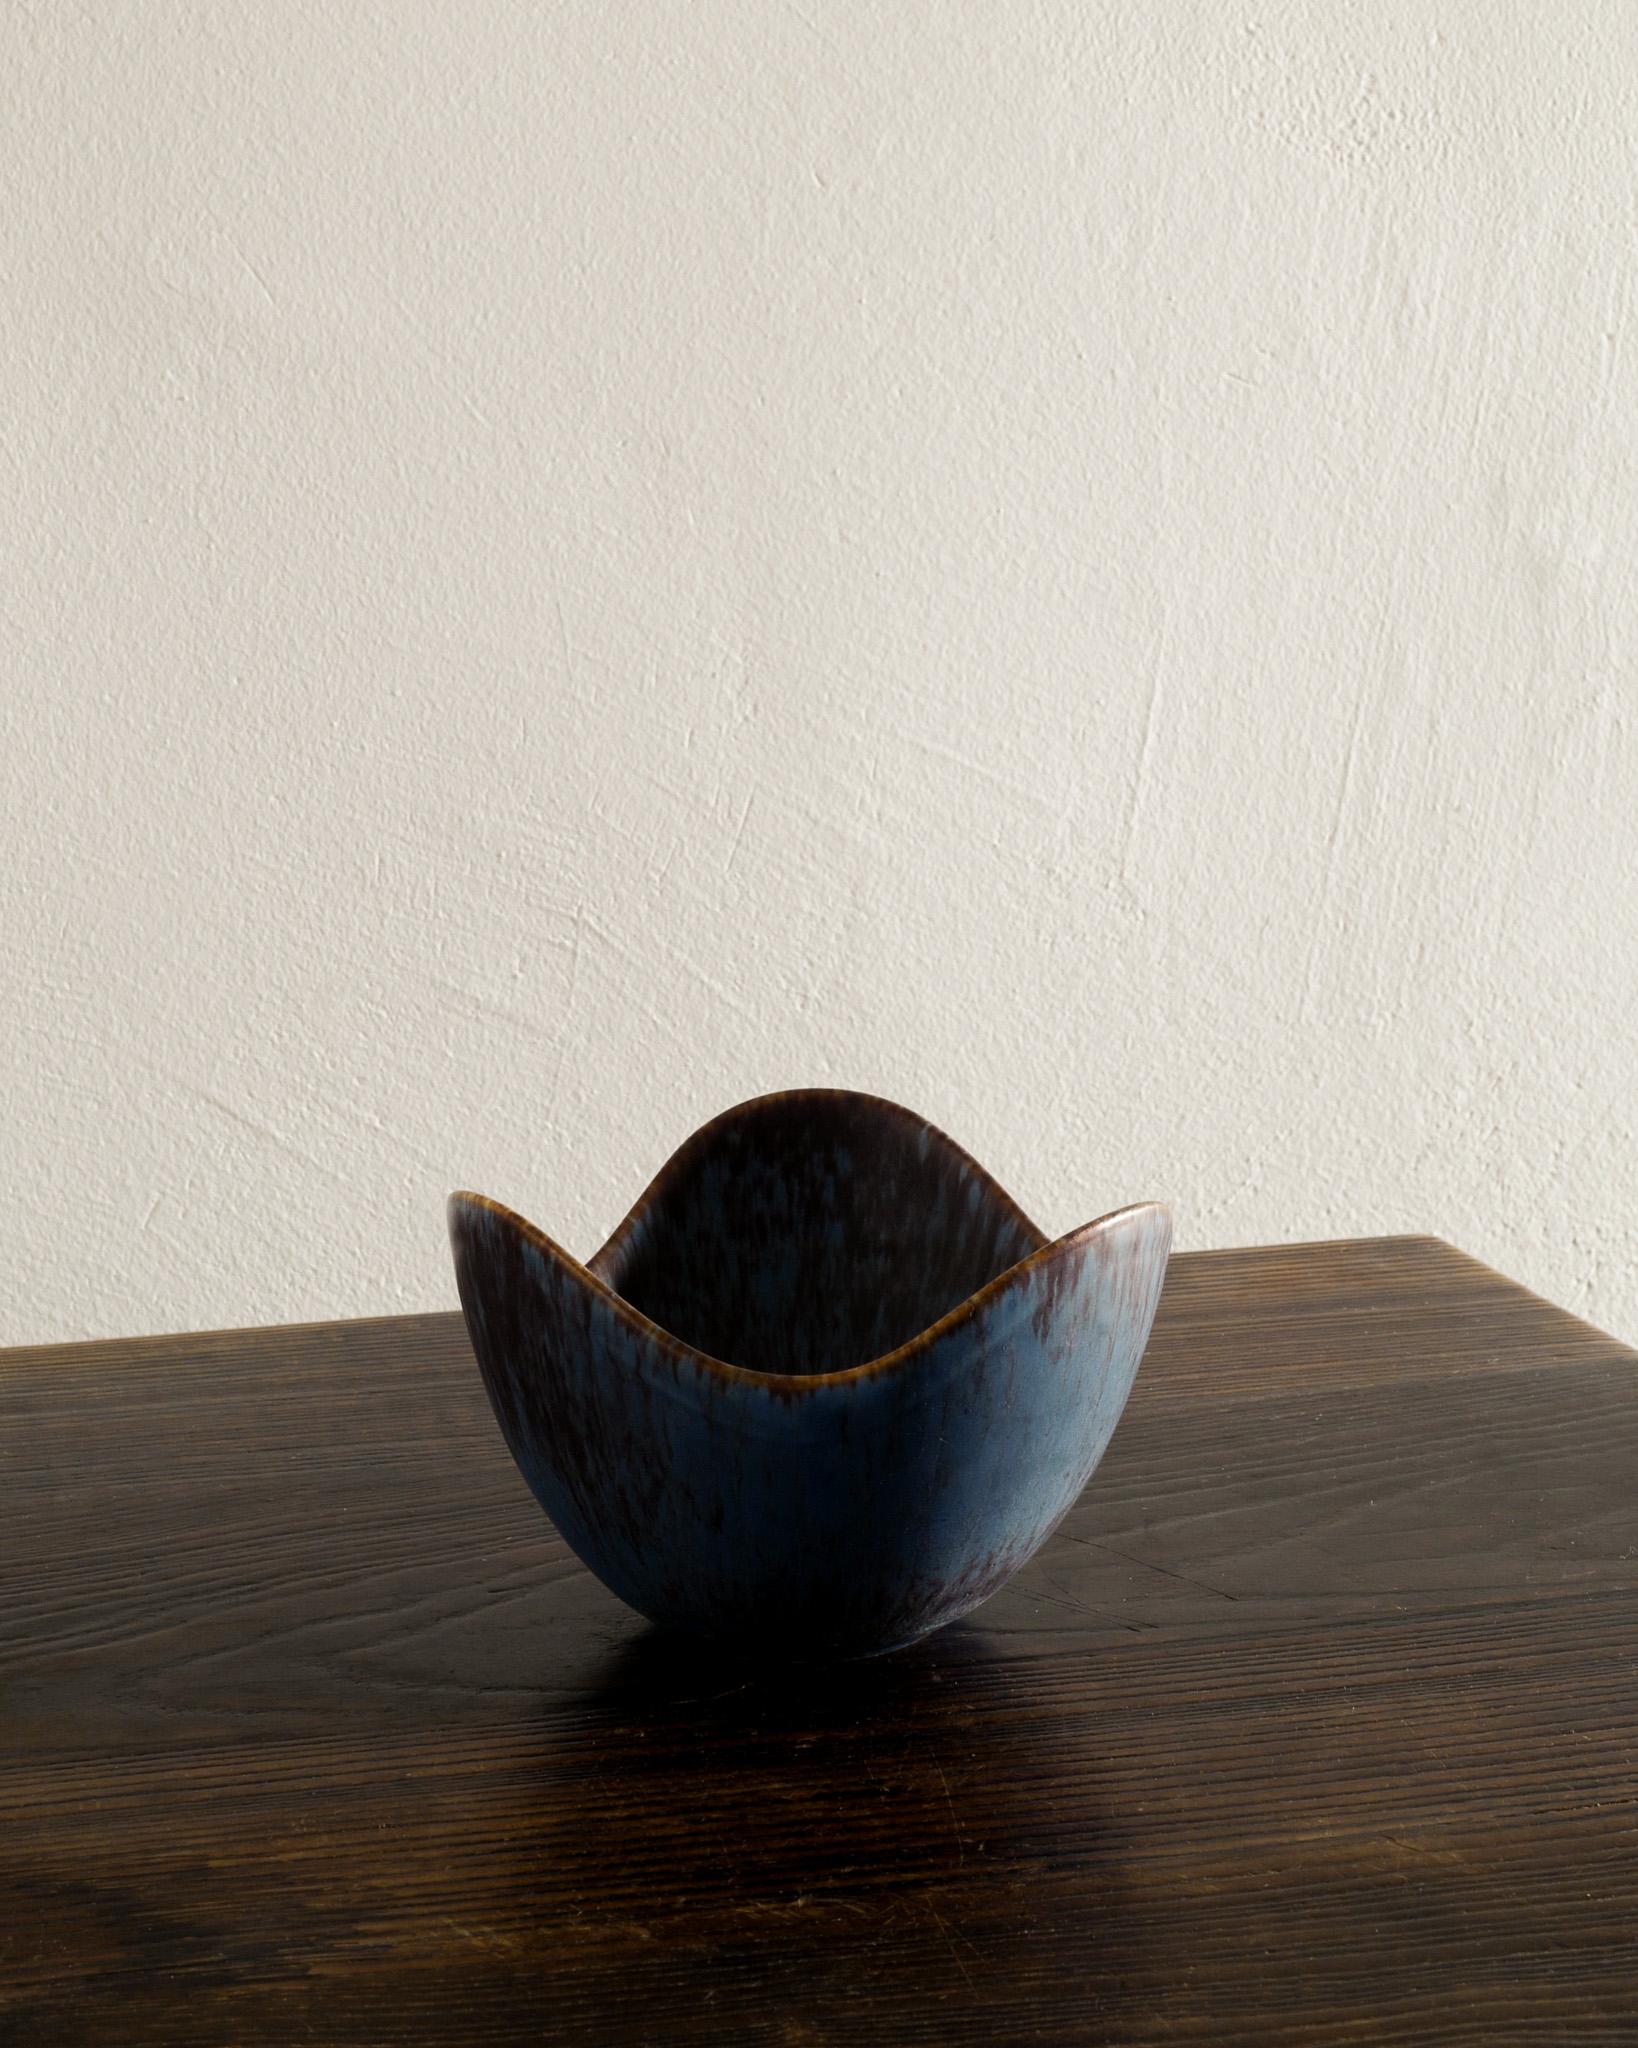 Rare ceramic / stoneware bowl in blue brown glaze by Gunnar Nylund produced by Rörstrand Sweden 1950s. In good condition. Signed 